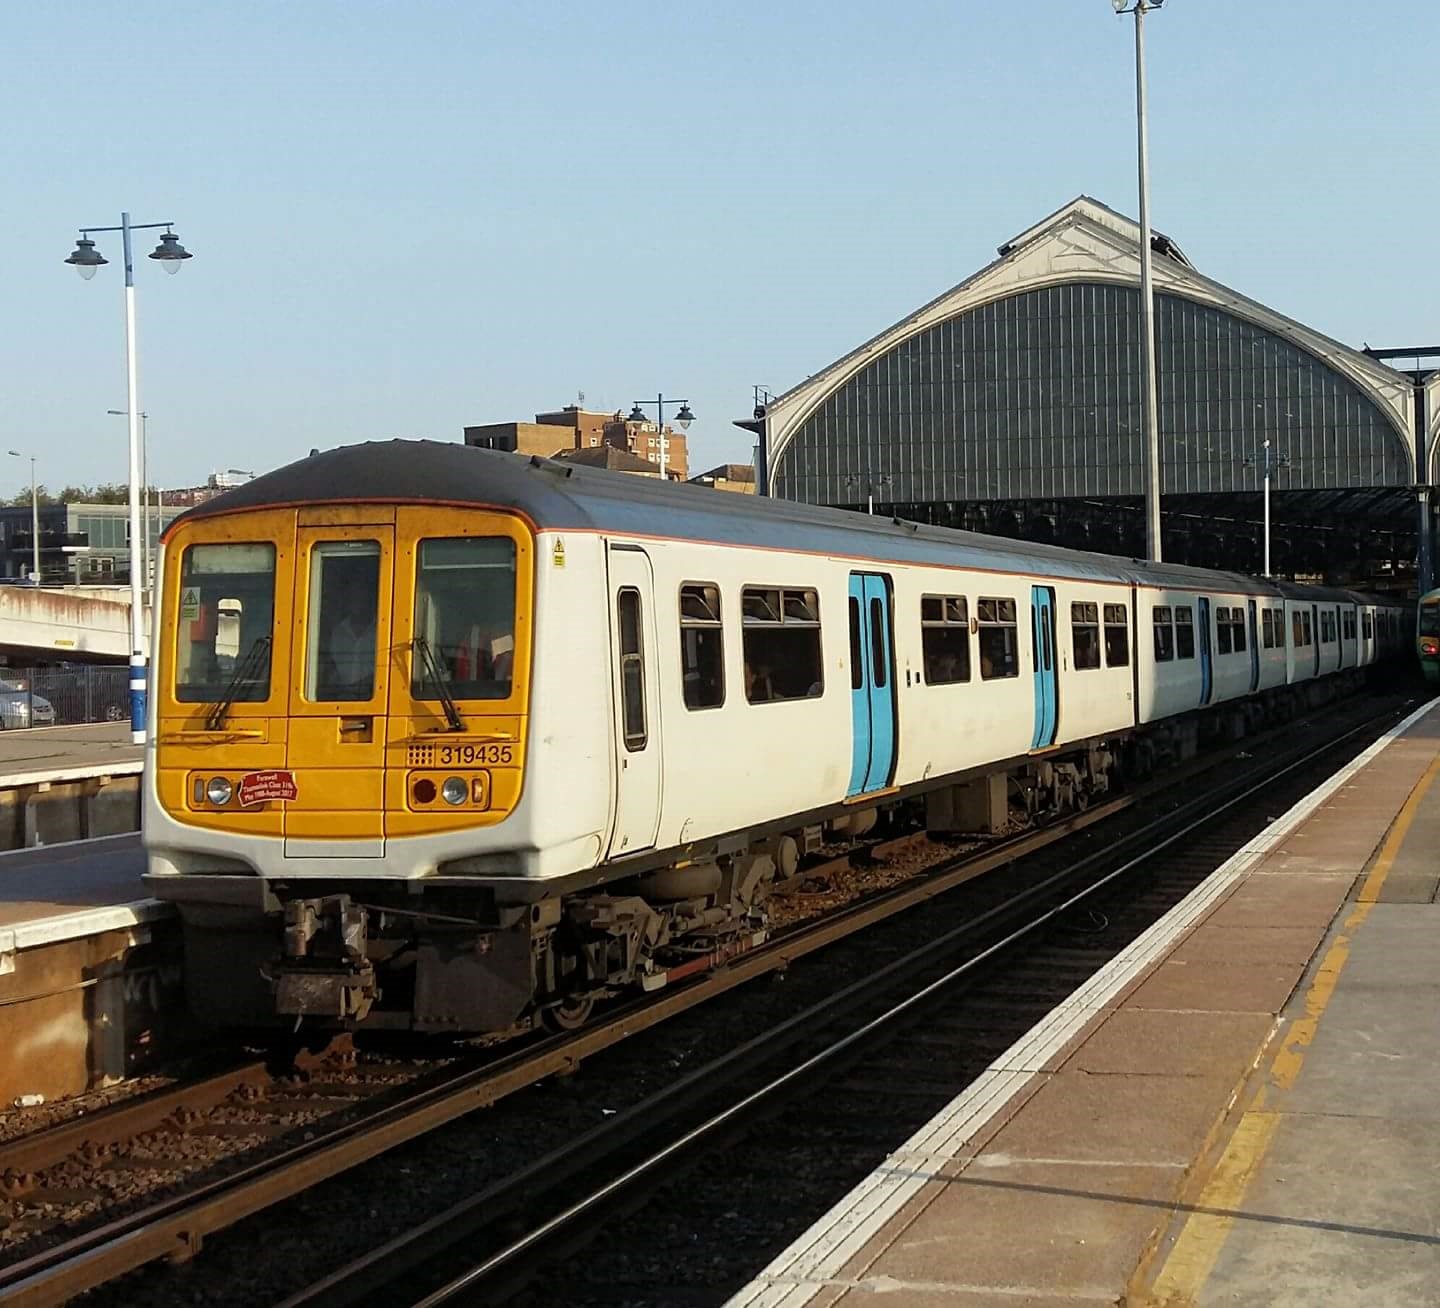 Thameslink replaces last of 30-year-old Class 319 fleet